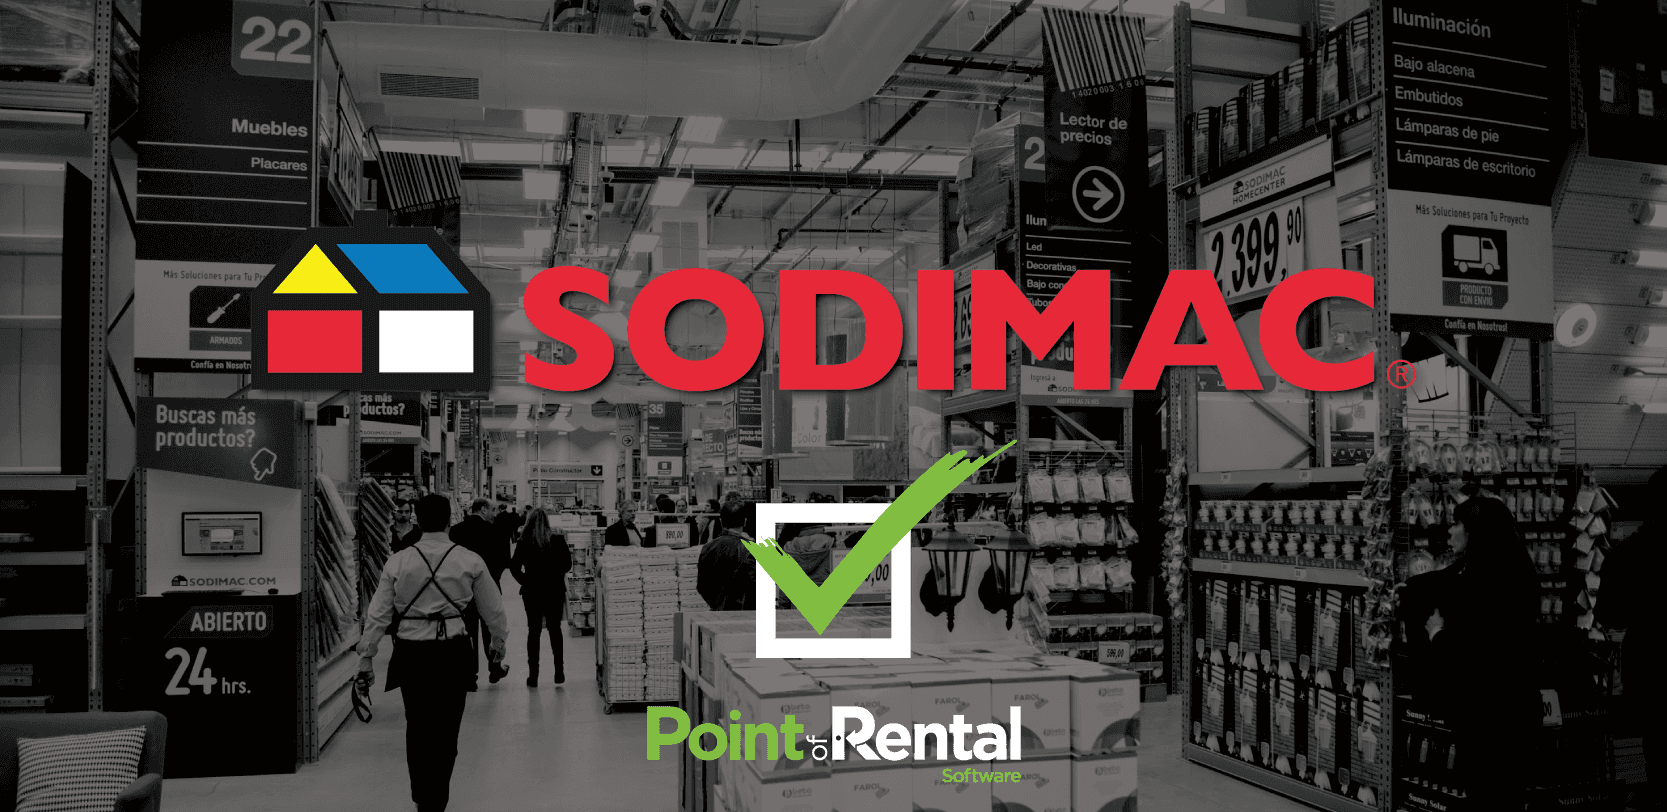 Sodimac agreed to terms with Point of Rental to run rentals in its stores.